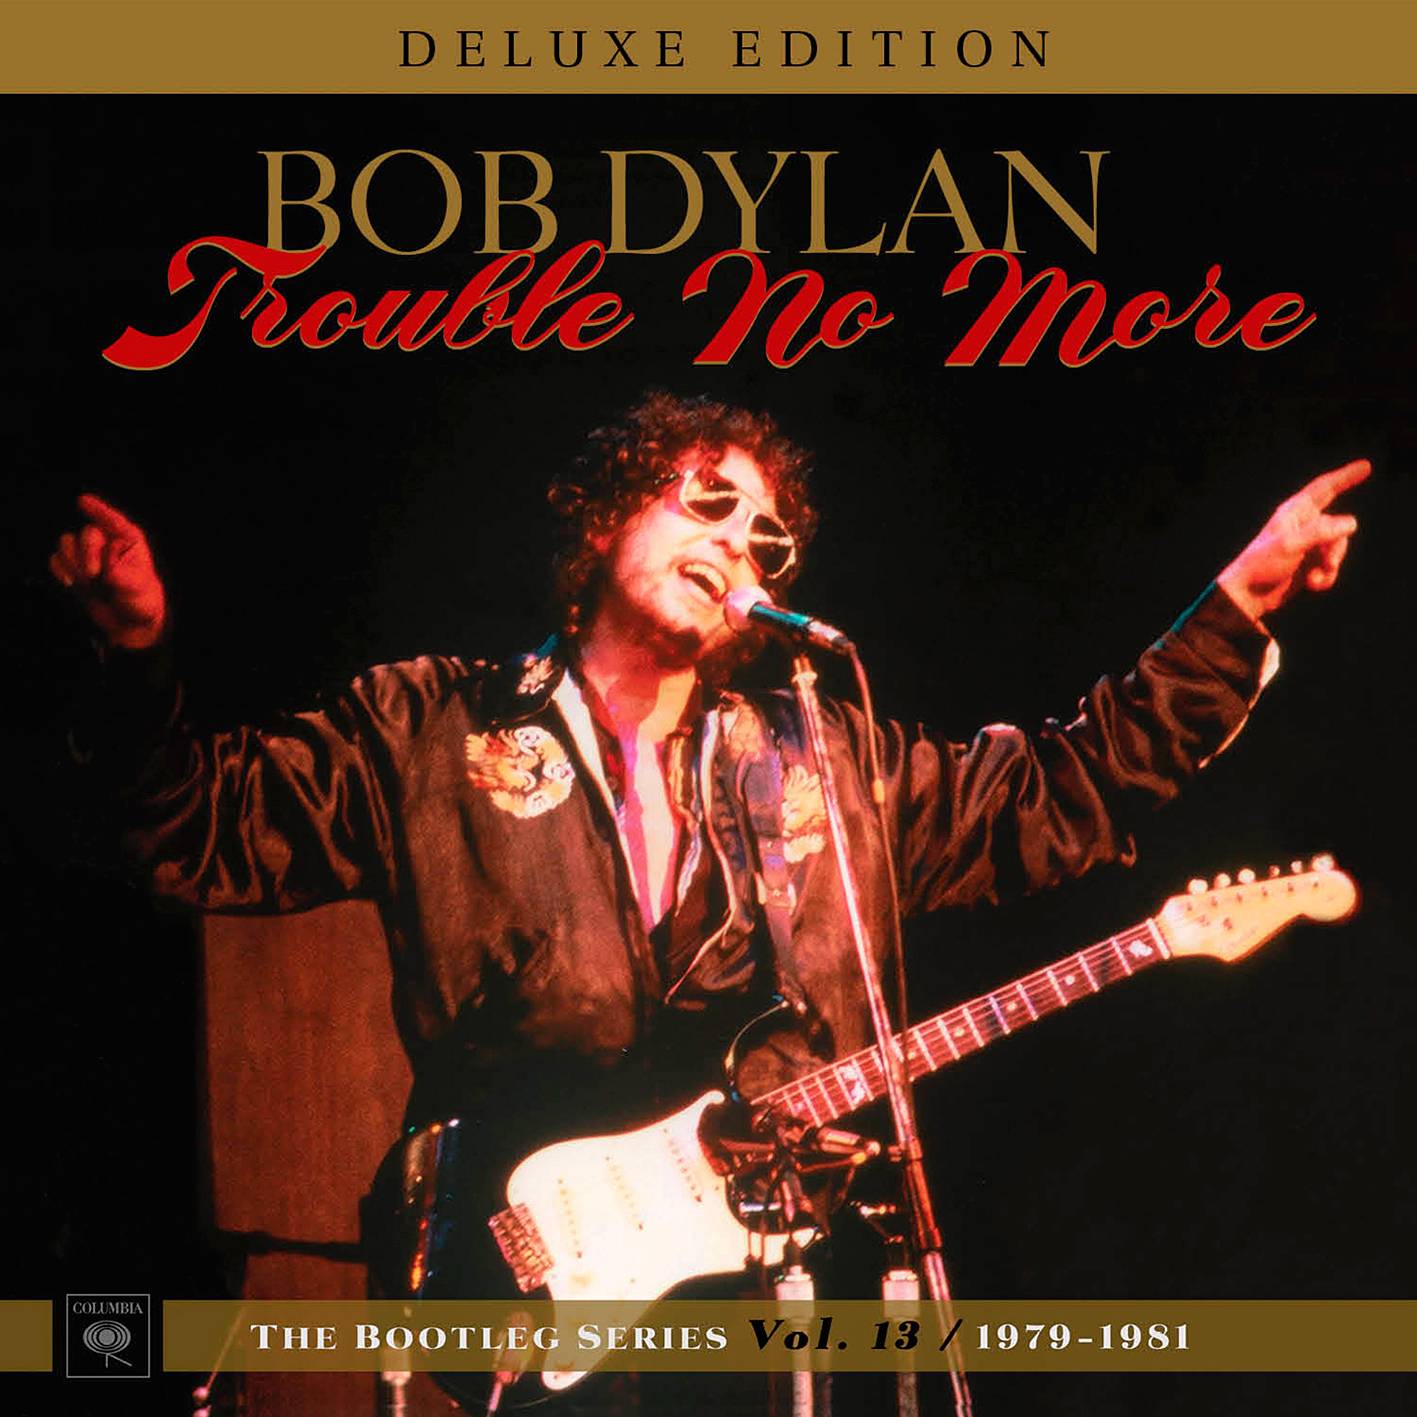 Bob Dylan - Trouble No More: The Bootleg Series, Vol. 13 - 1979-1981 (Deluxe Edition) (2017) [HDTracks FLAC 24bit/96kHz]